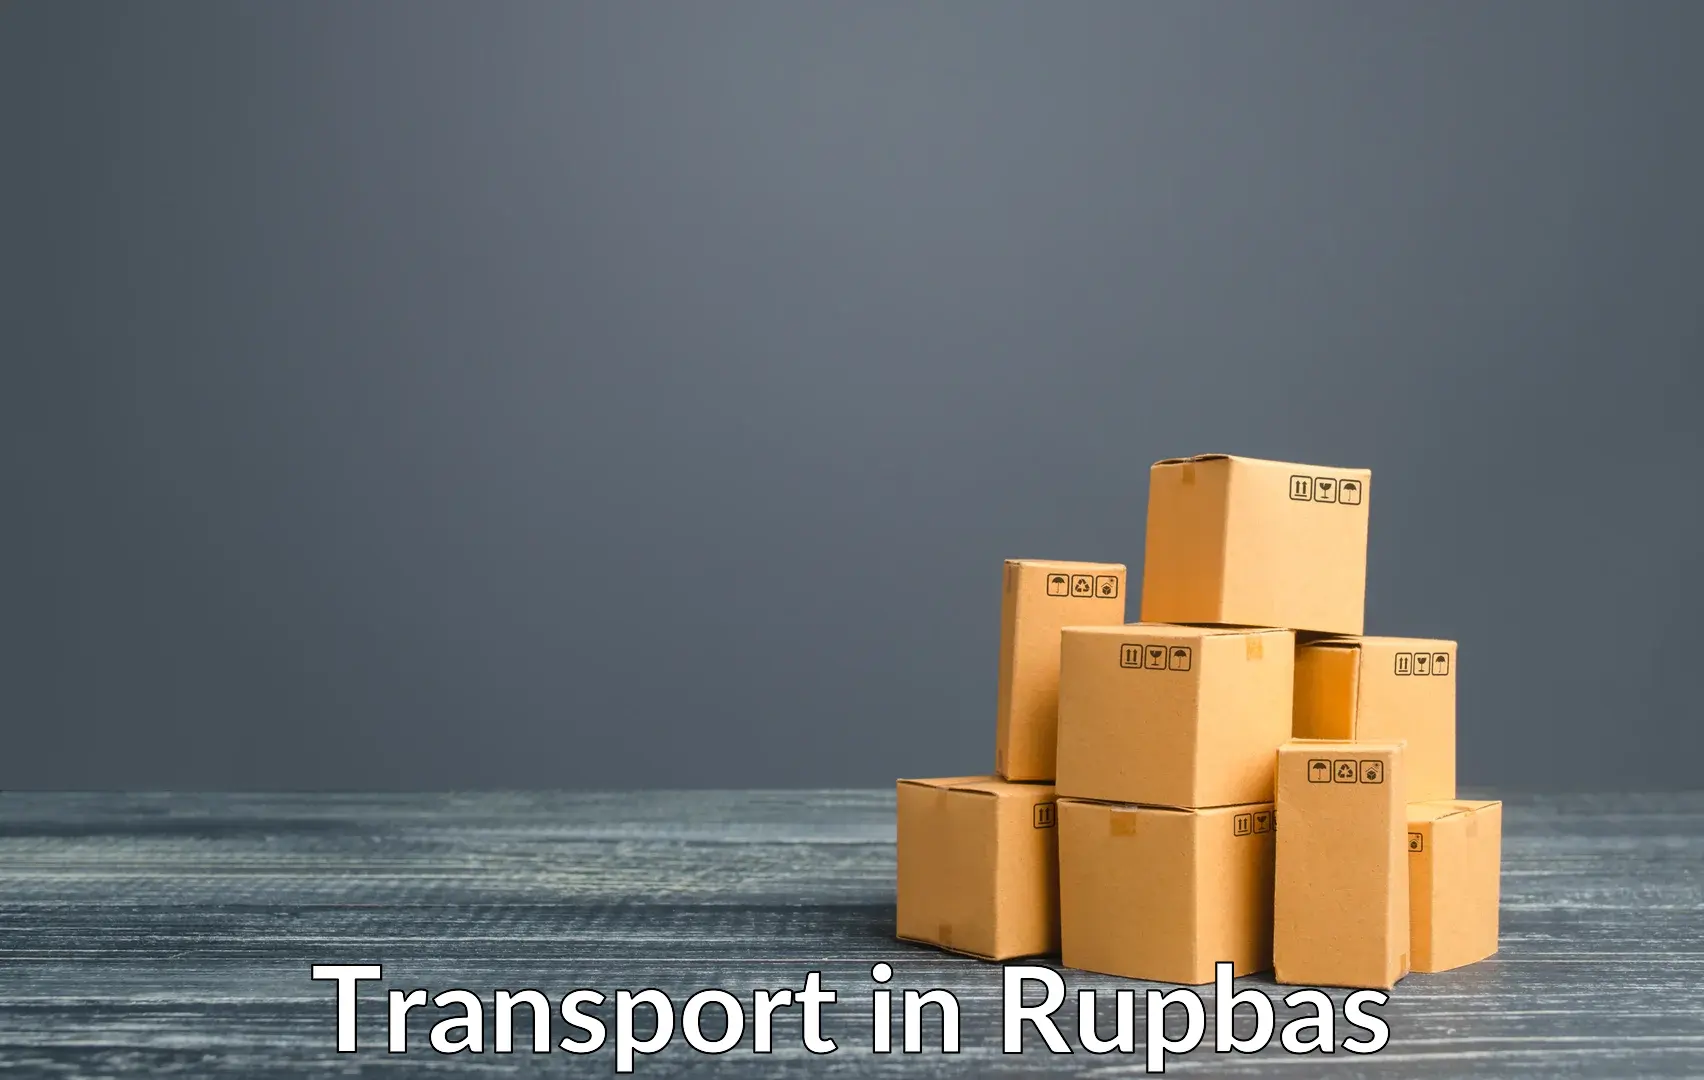 Air cargo transport services in Rupbas